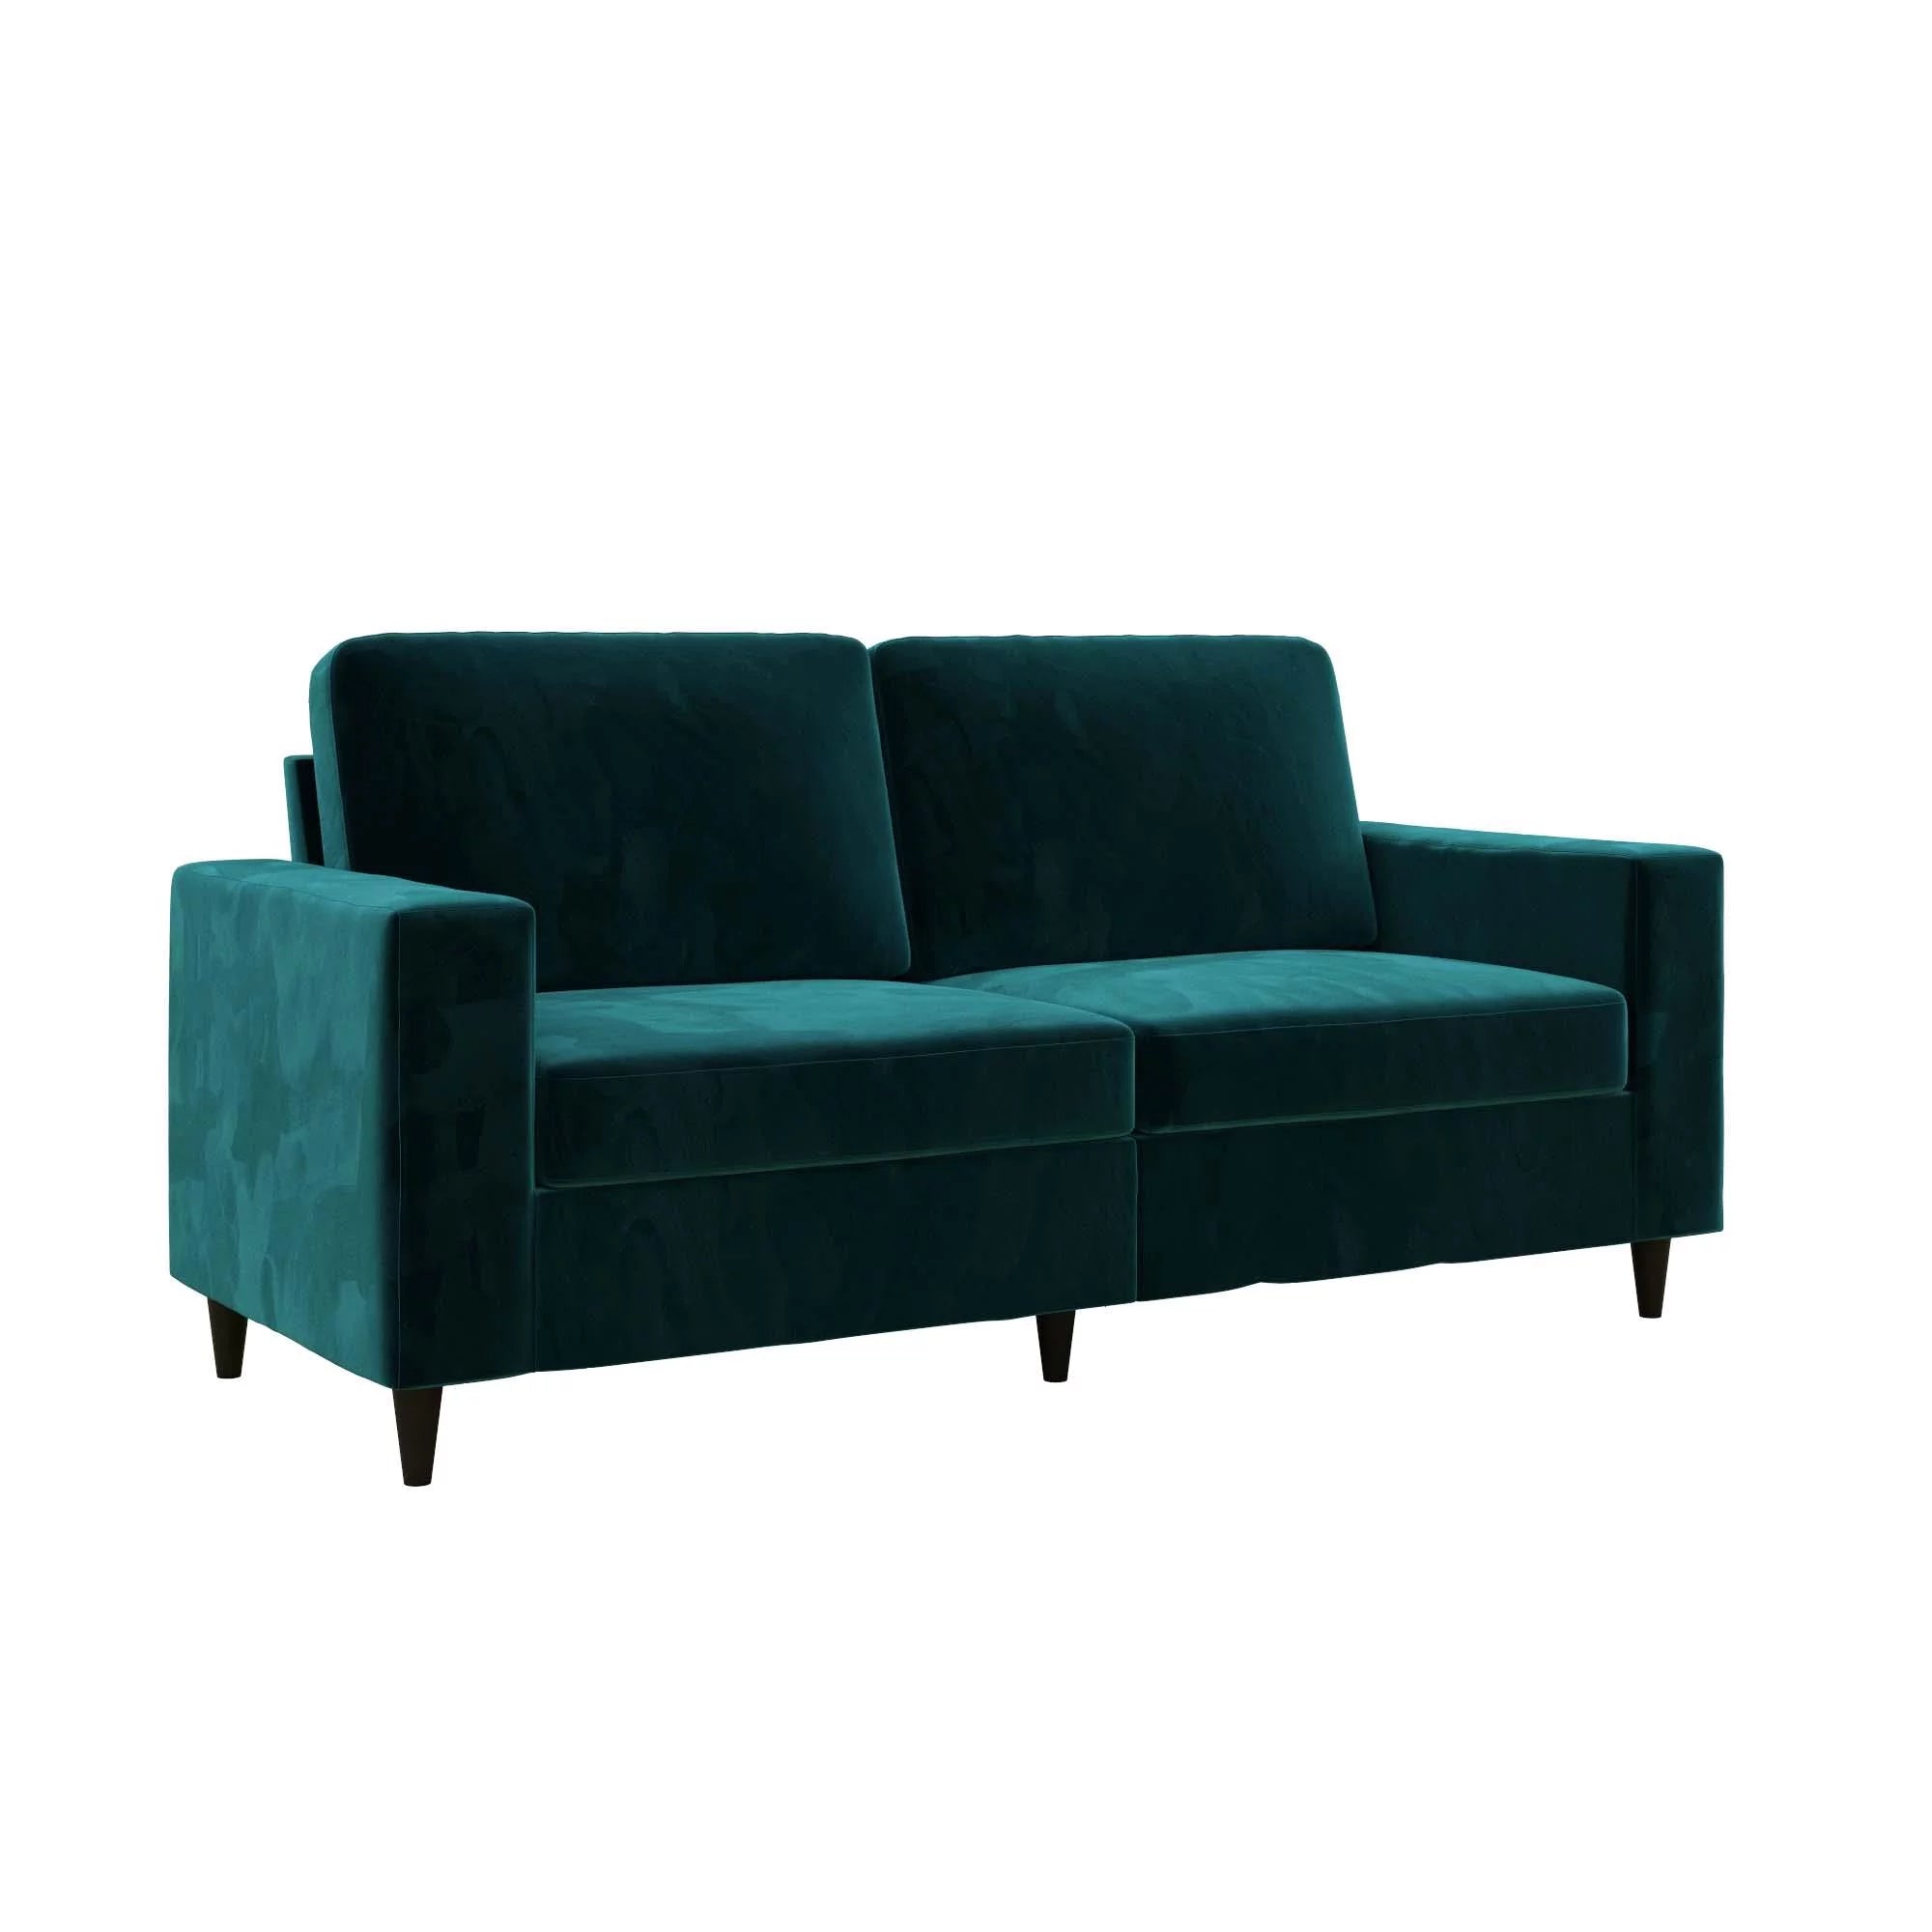 3 Seater Sofas On Sale (2 Colors)